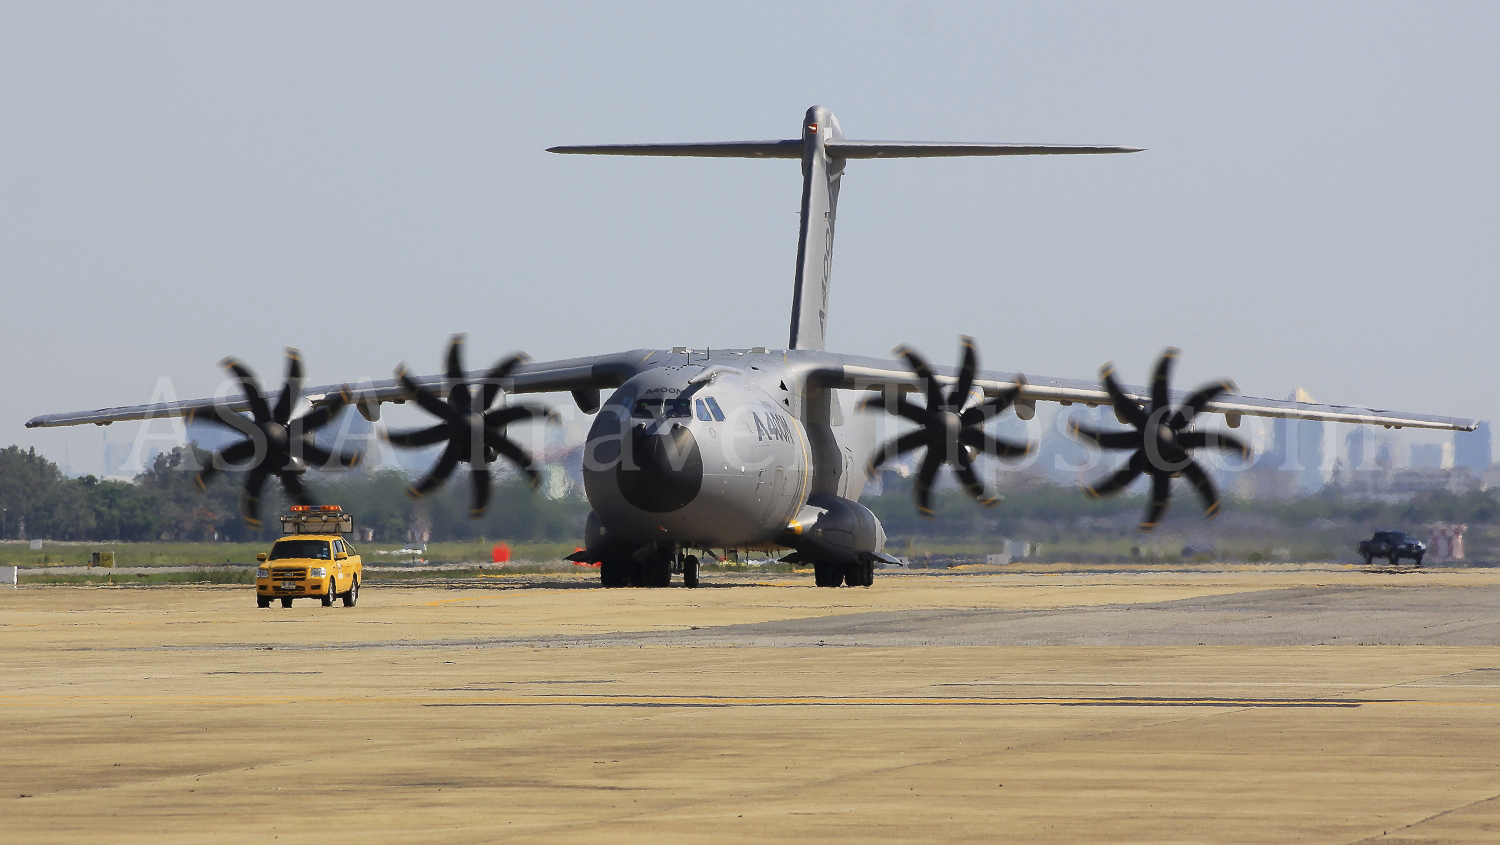 Airbus A400M at Don Muang Airport in Bangkok, Thailand, on 19 April 2012. Picture by Steven Howard of TravelNewsAsia.com Click to enlarge.